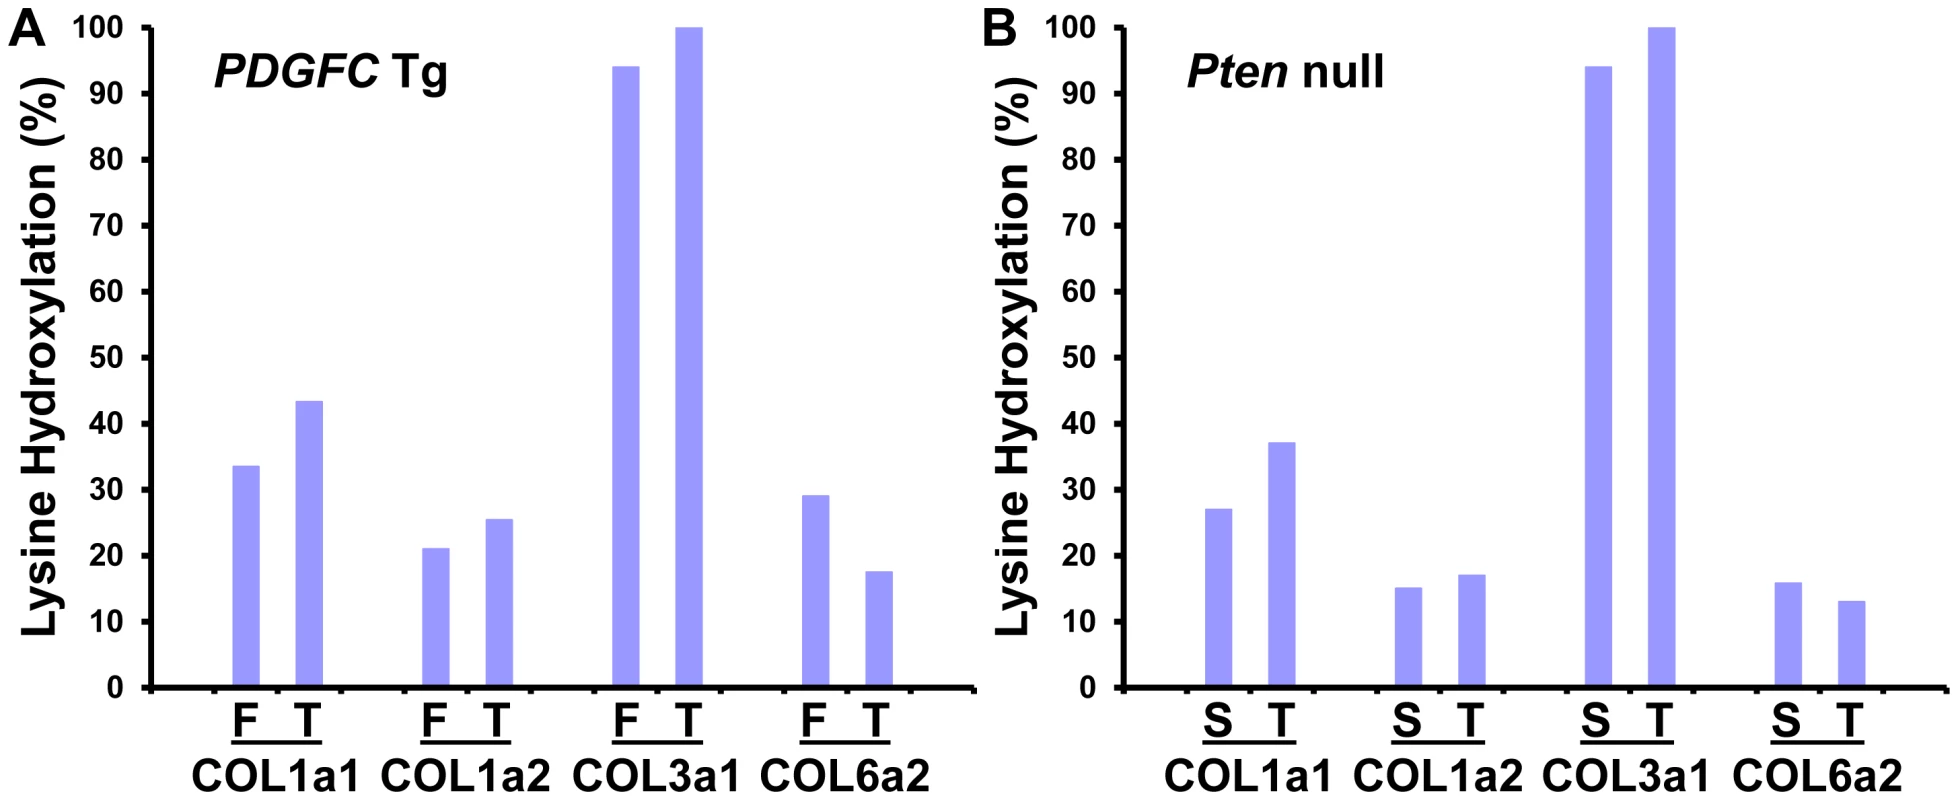 Percentage of peptides with lysine hydroxylation identified for COL1A1, COL1A2, COL3A1, and COL6A2.